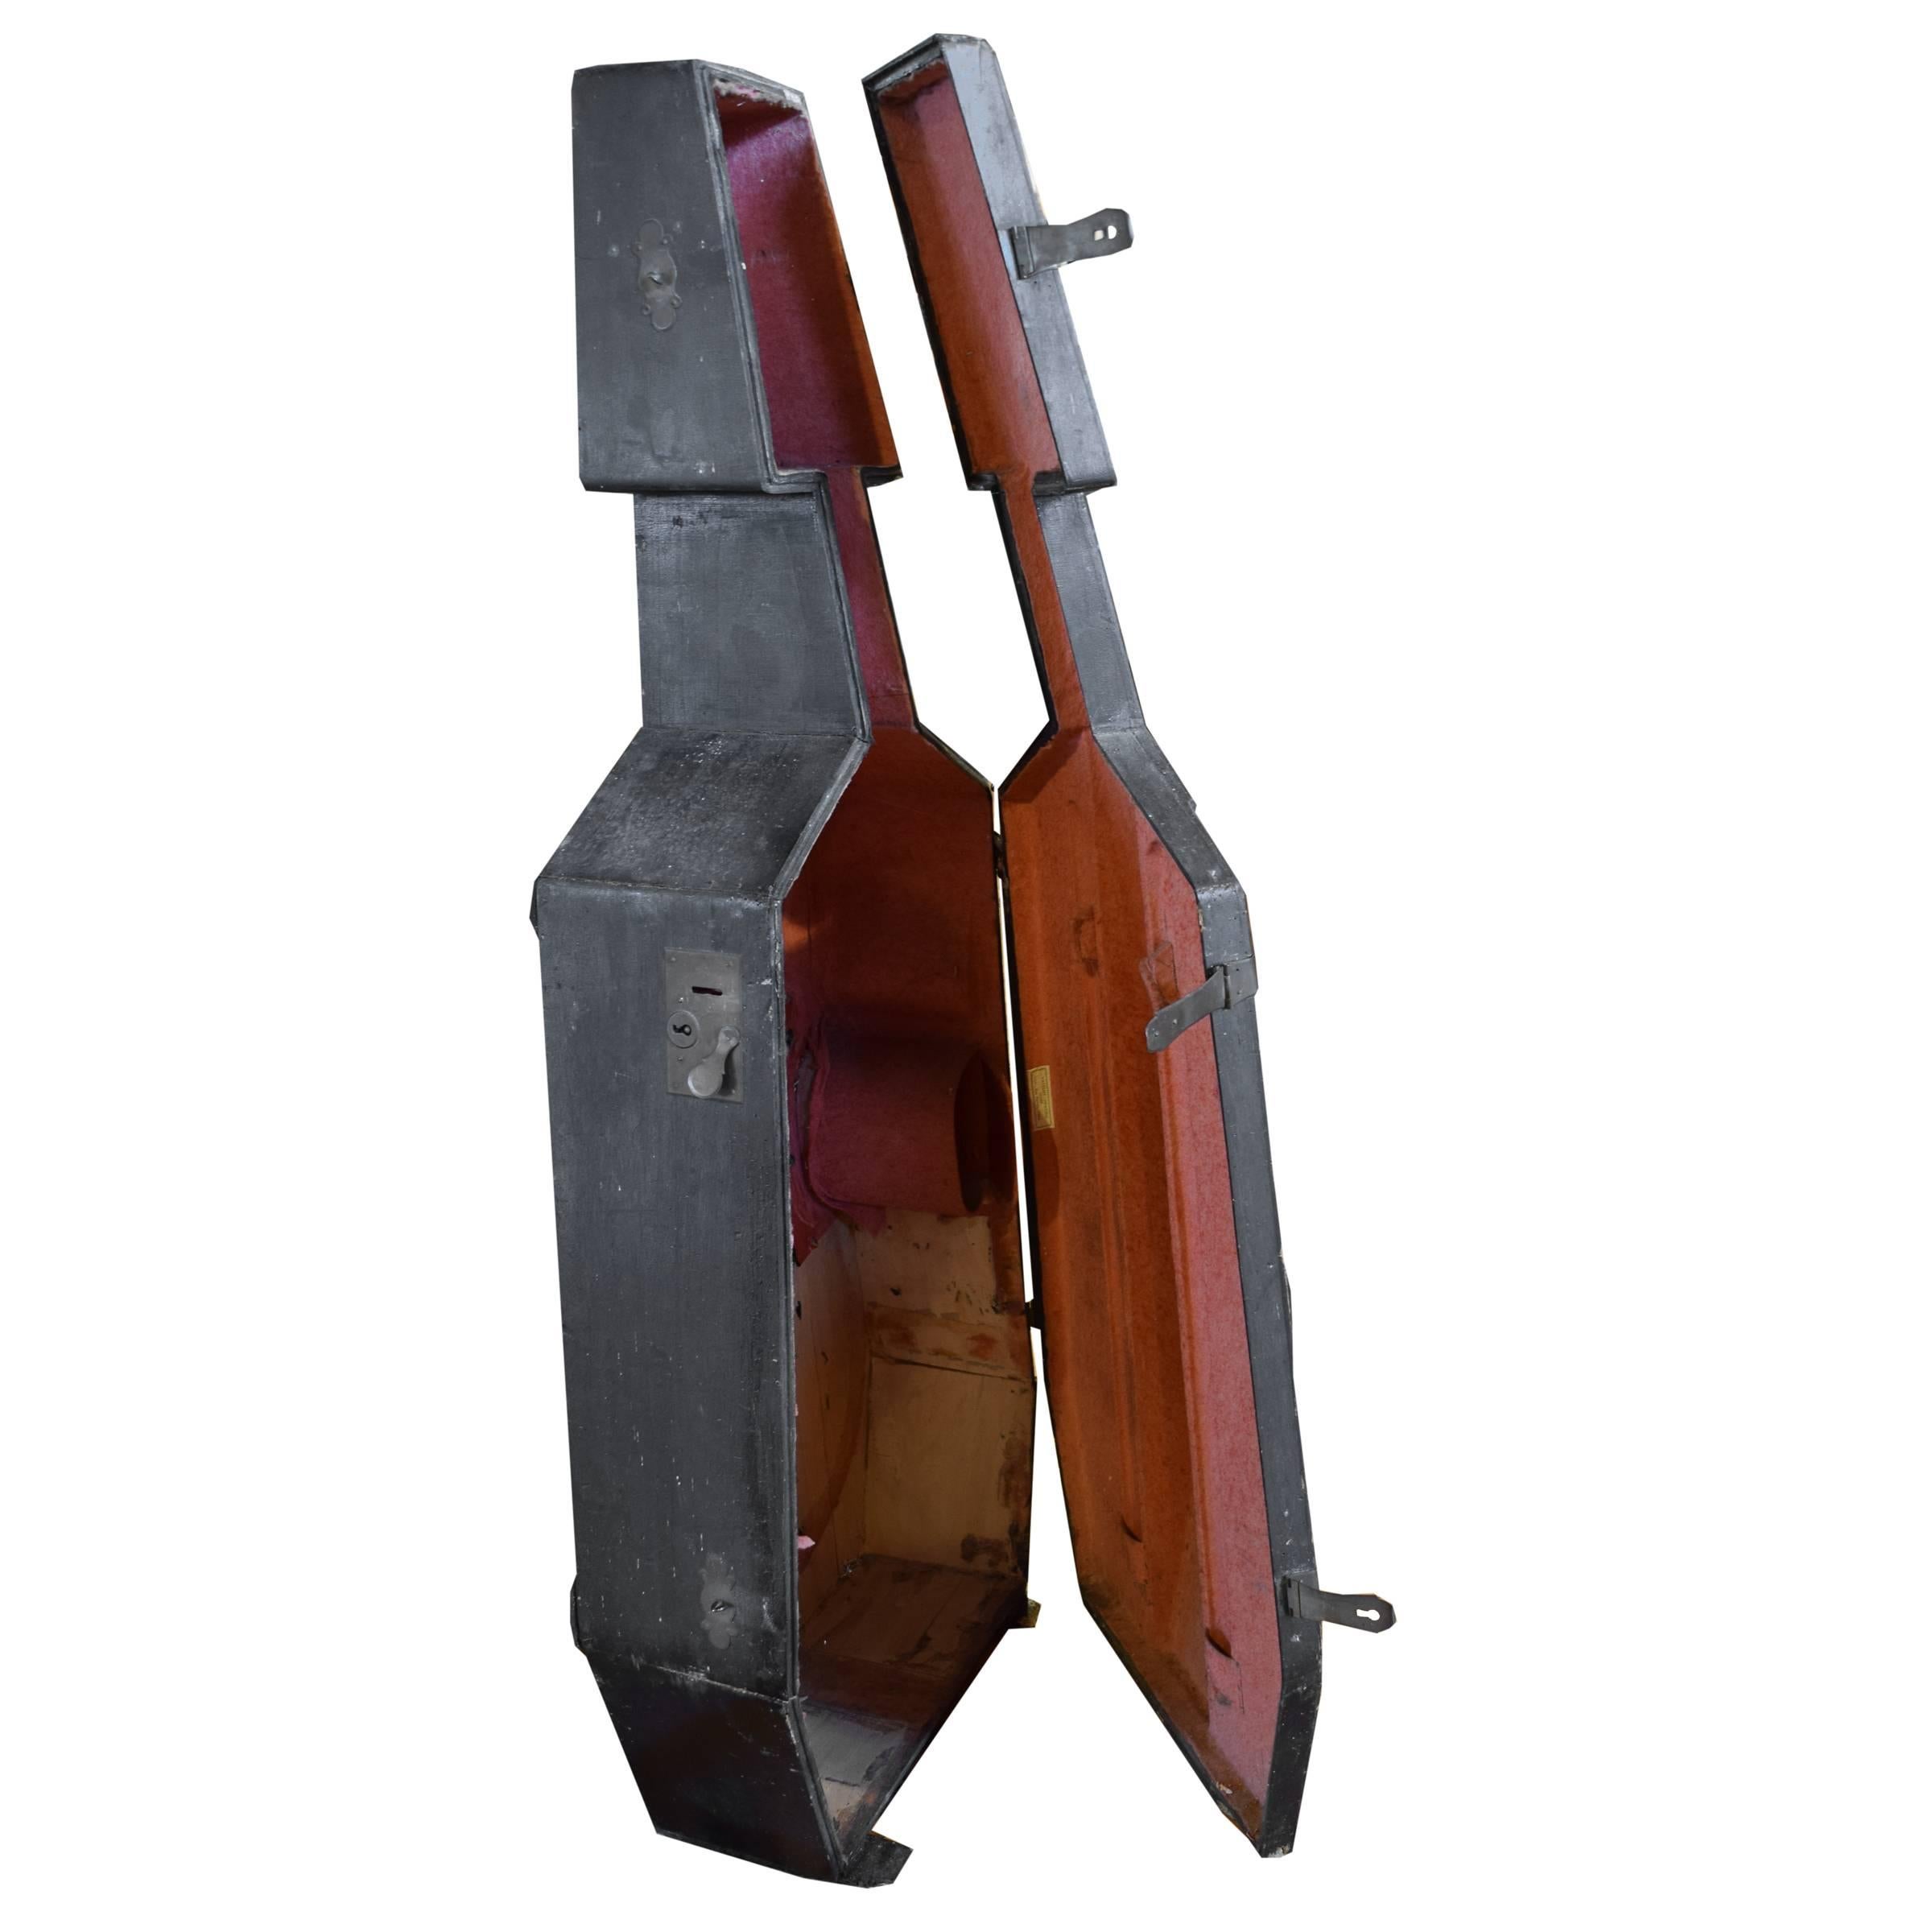 A gorgeous 19th century wood Cello case with two metal closures and a red fabric lined interiors. A great sculptural form!
.